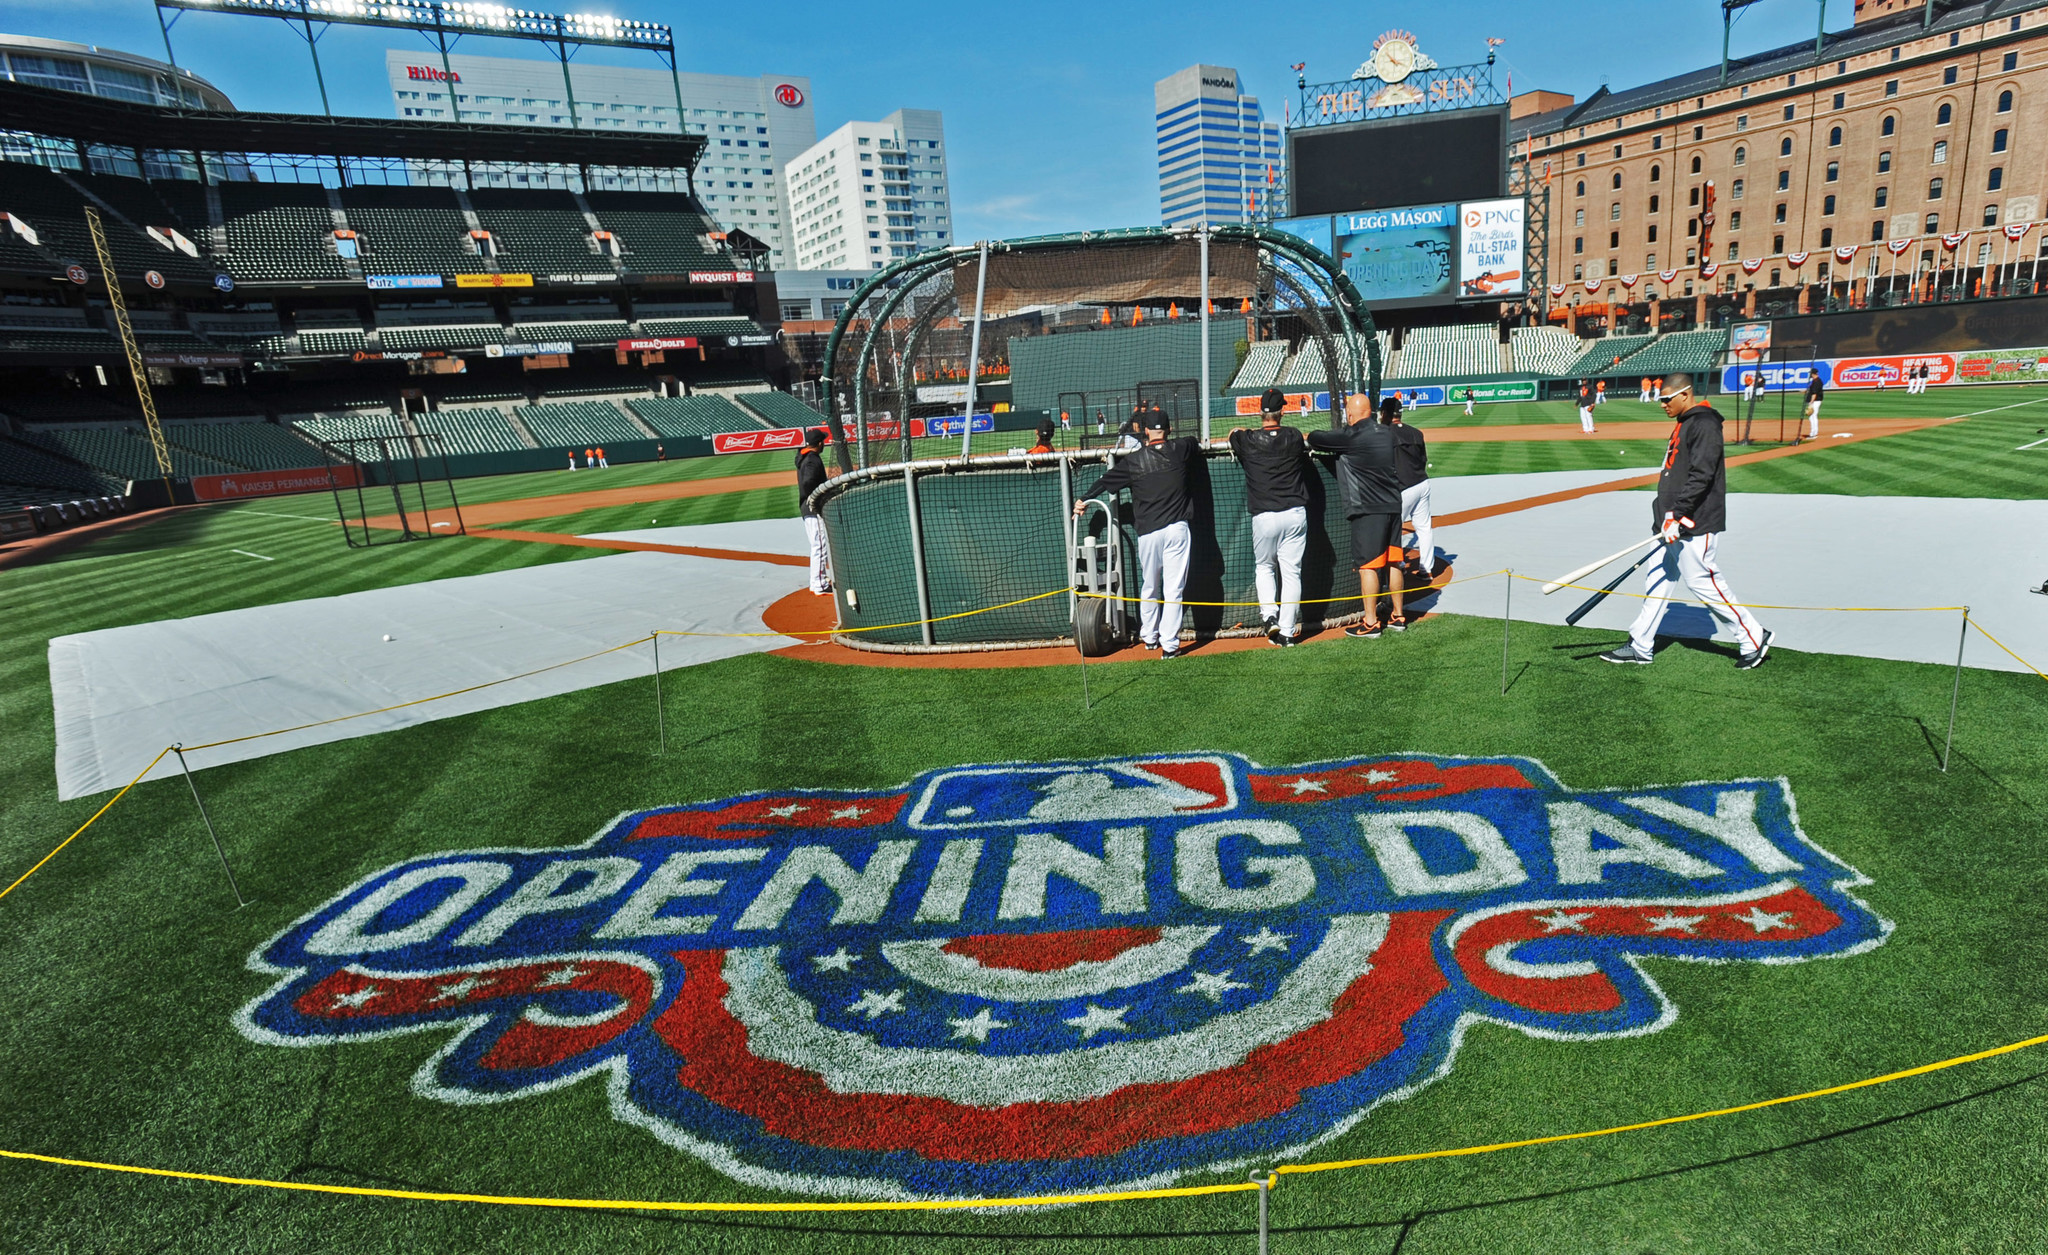 The Orioles' opening act is set to begin, and early games could be